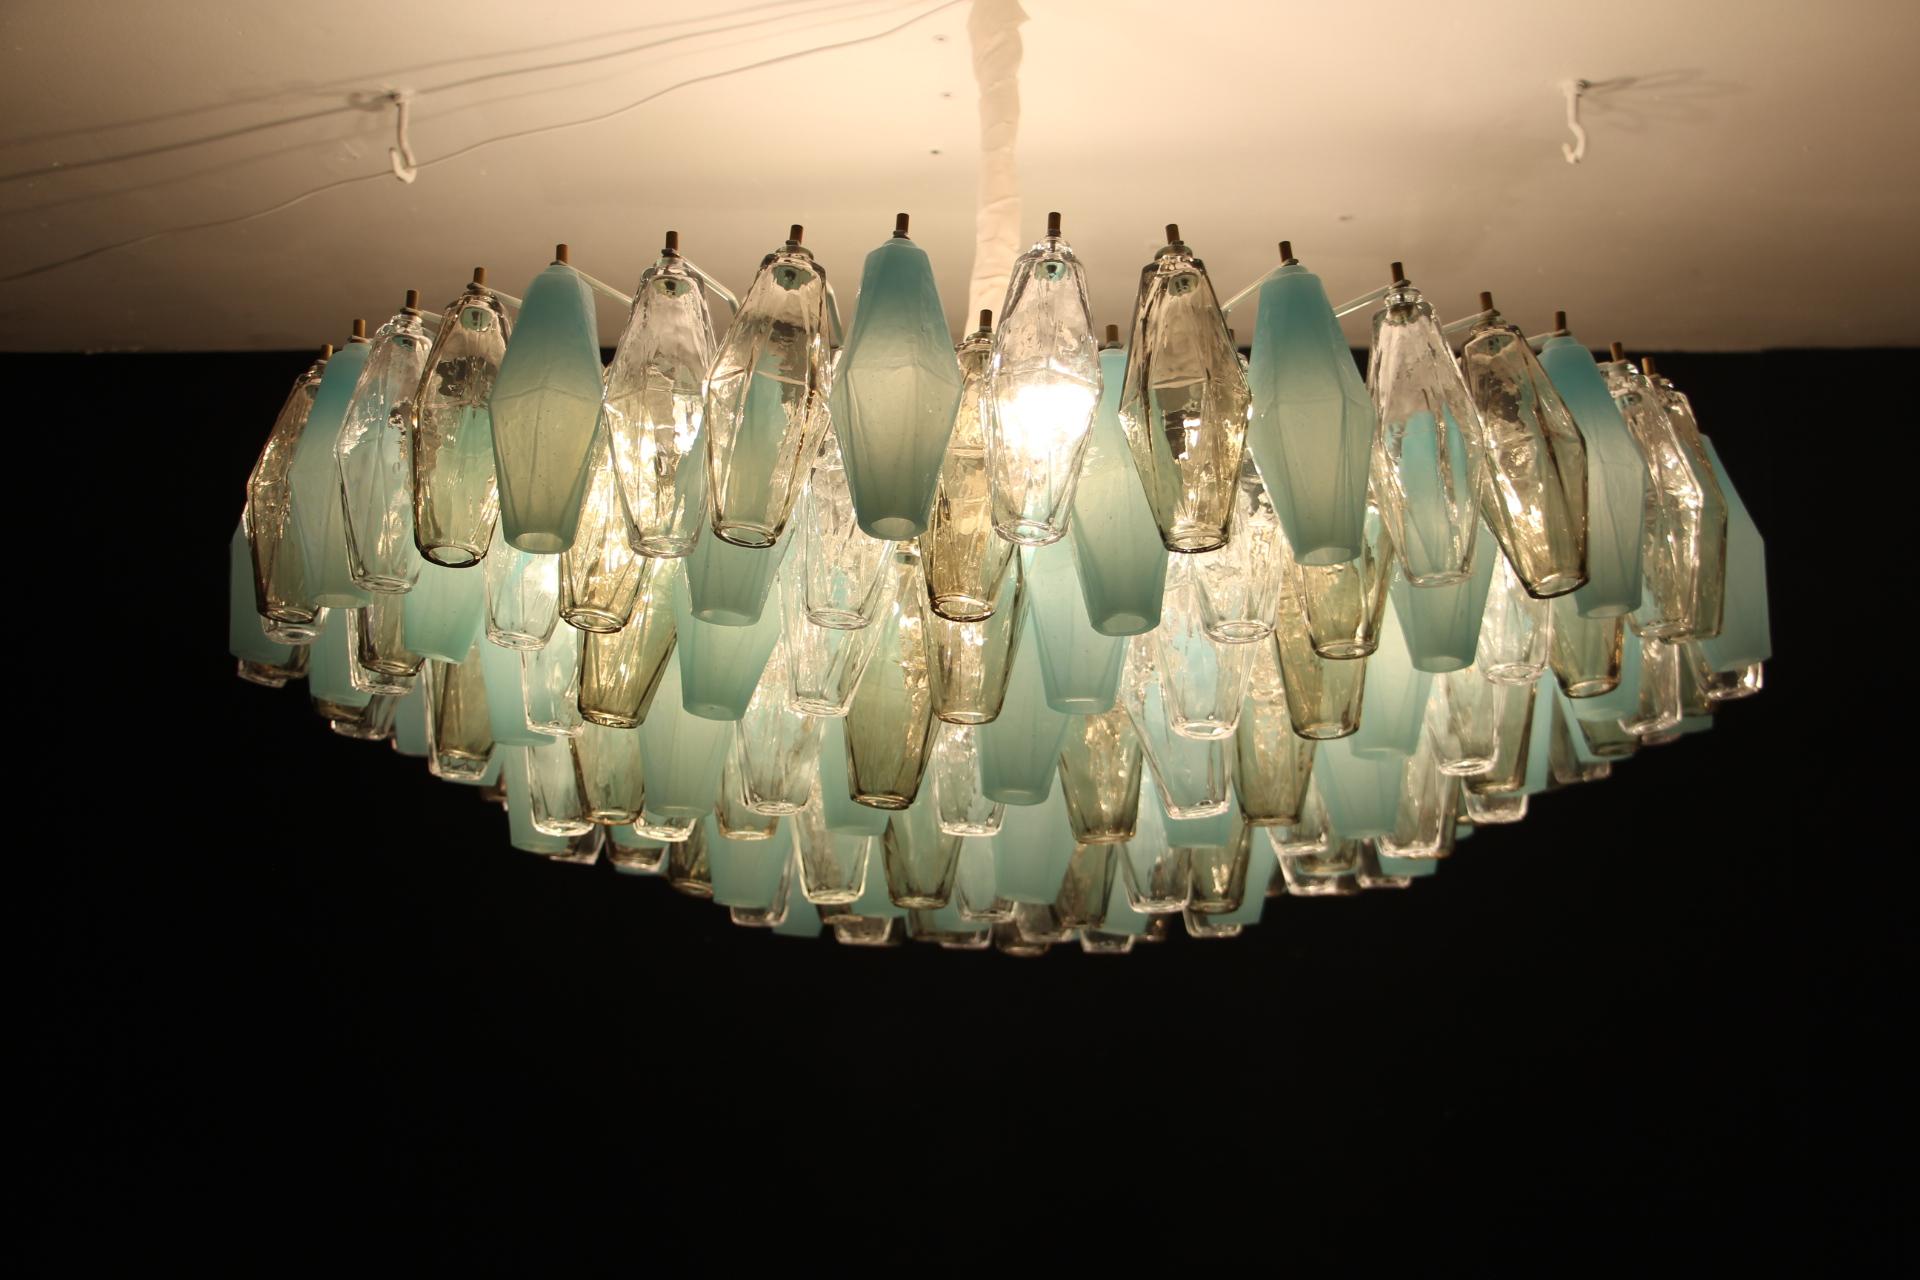 This beautiful chandelier or flush mount features 193 pieces of Murano glass poliedri pieces. Each piece of glass has been made individually by hand in Murano and shows abstract diamond faceted shape. Colors of glass are very particular as they are